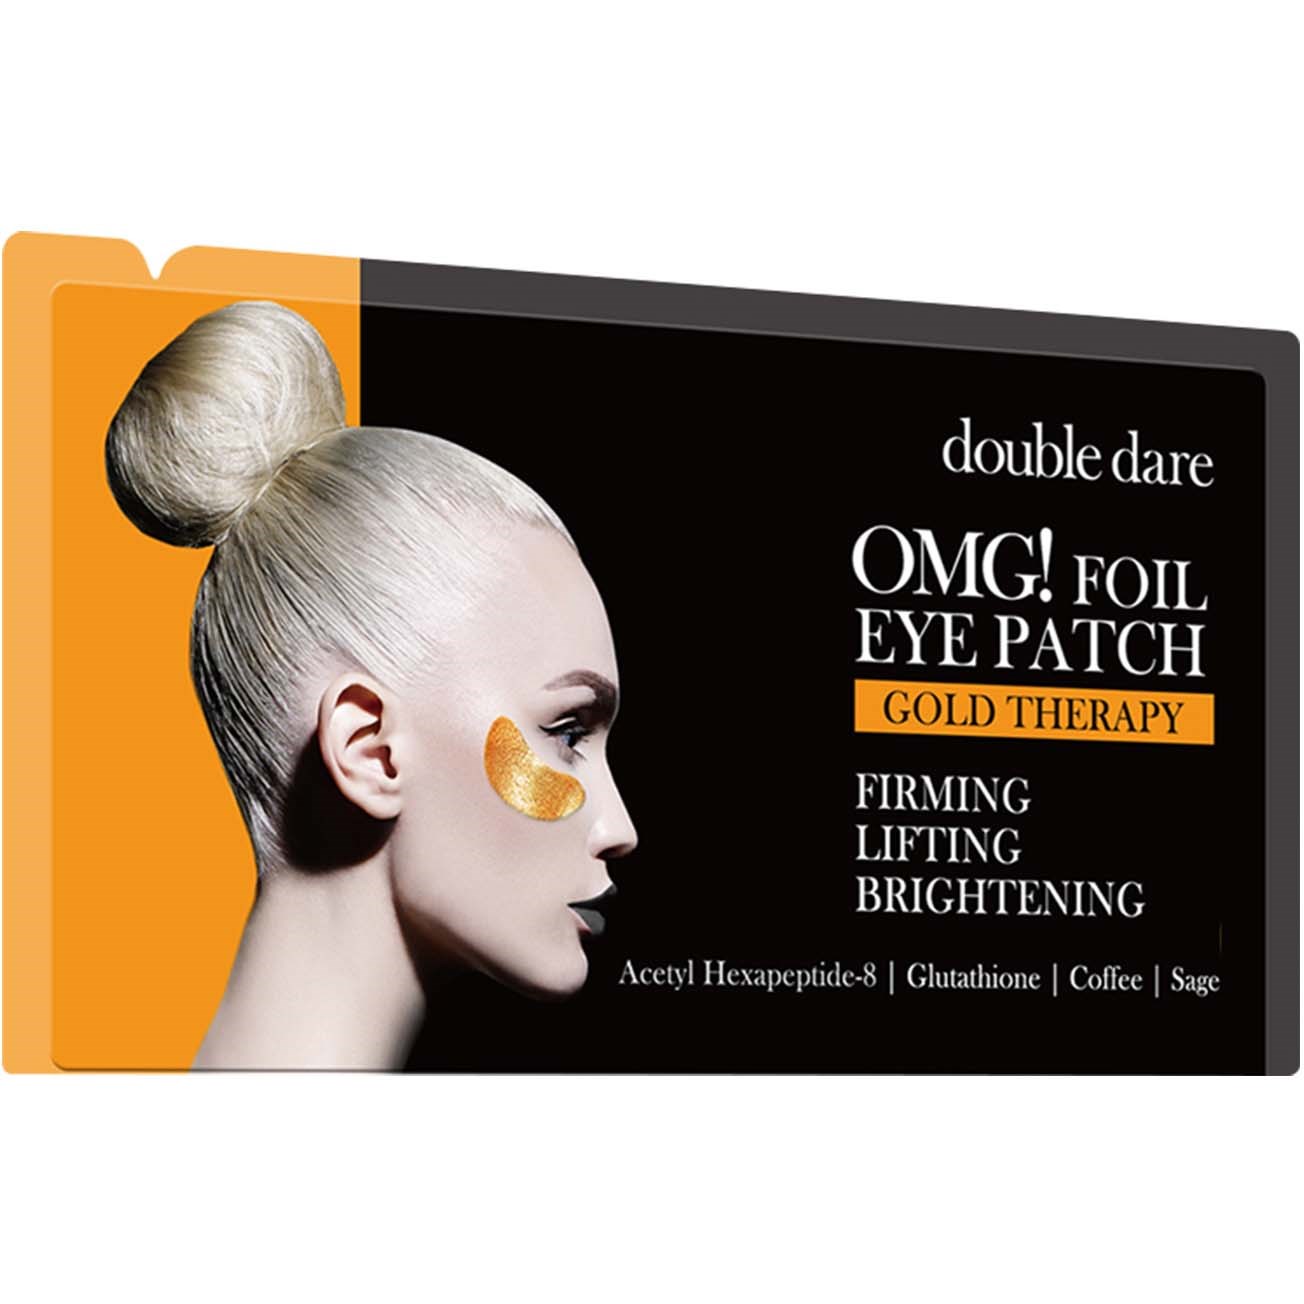 Läs mer om OMG! Double Dare Foil Eye Patch Gold Therapy